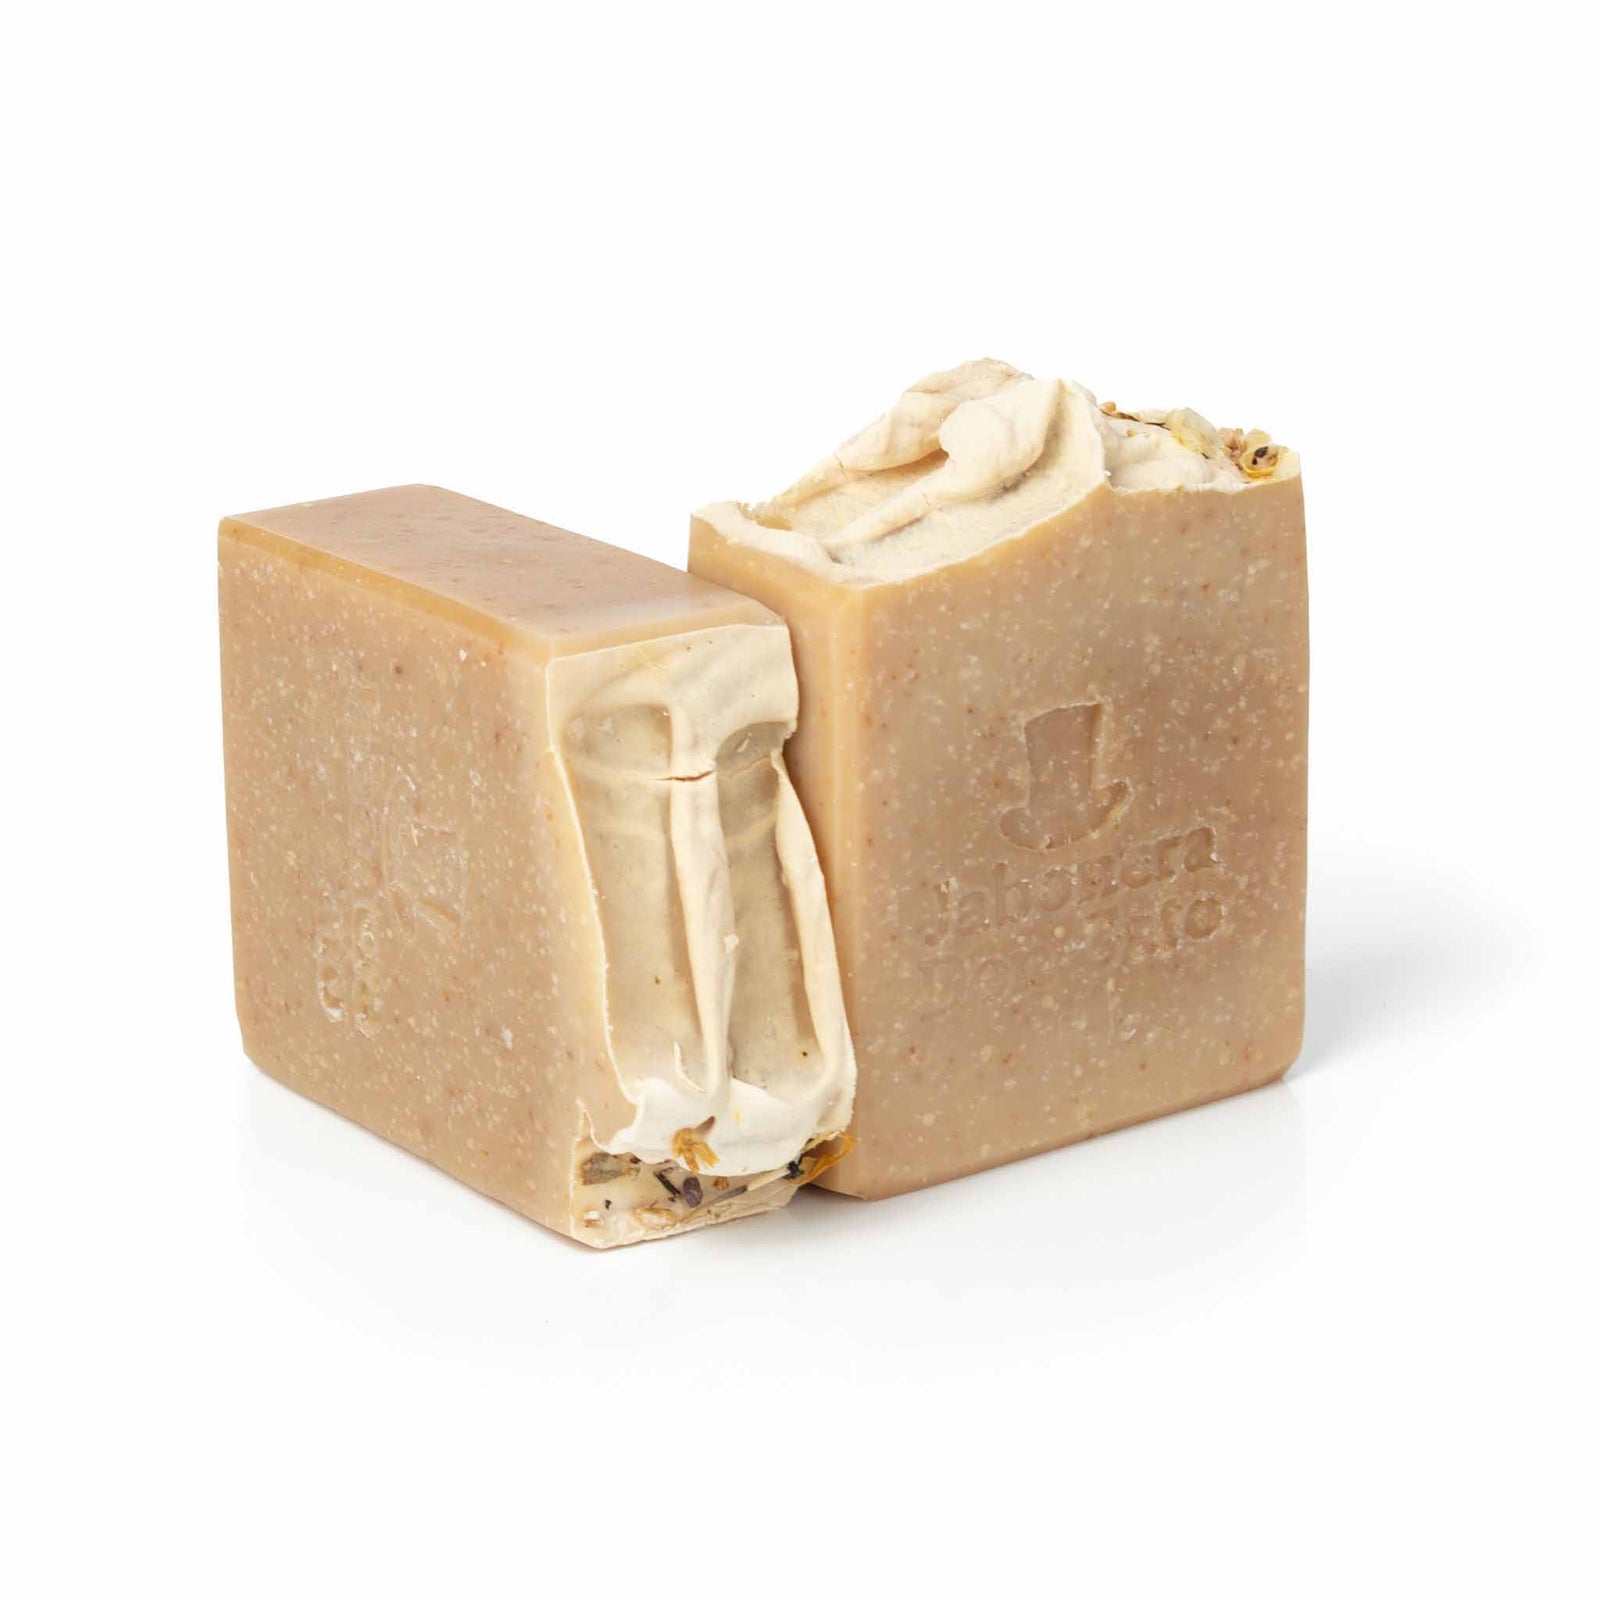 Two bars of Almond Artisan Soap, each with a rich, creamy texture and warm, inviting hue, elegantly displayed against a pristine white background, highlighting the luxurious and nourishing qualities of the handmade soap.